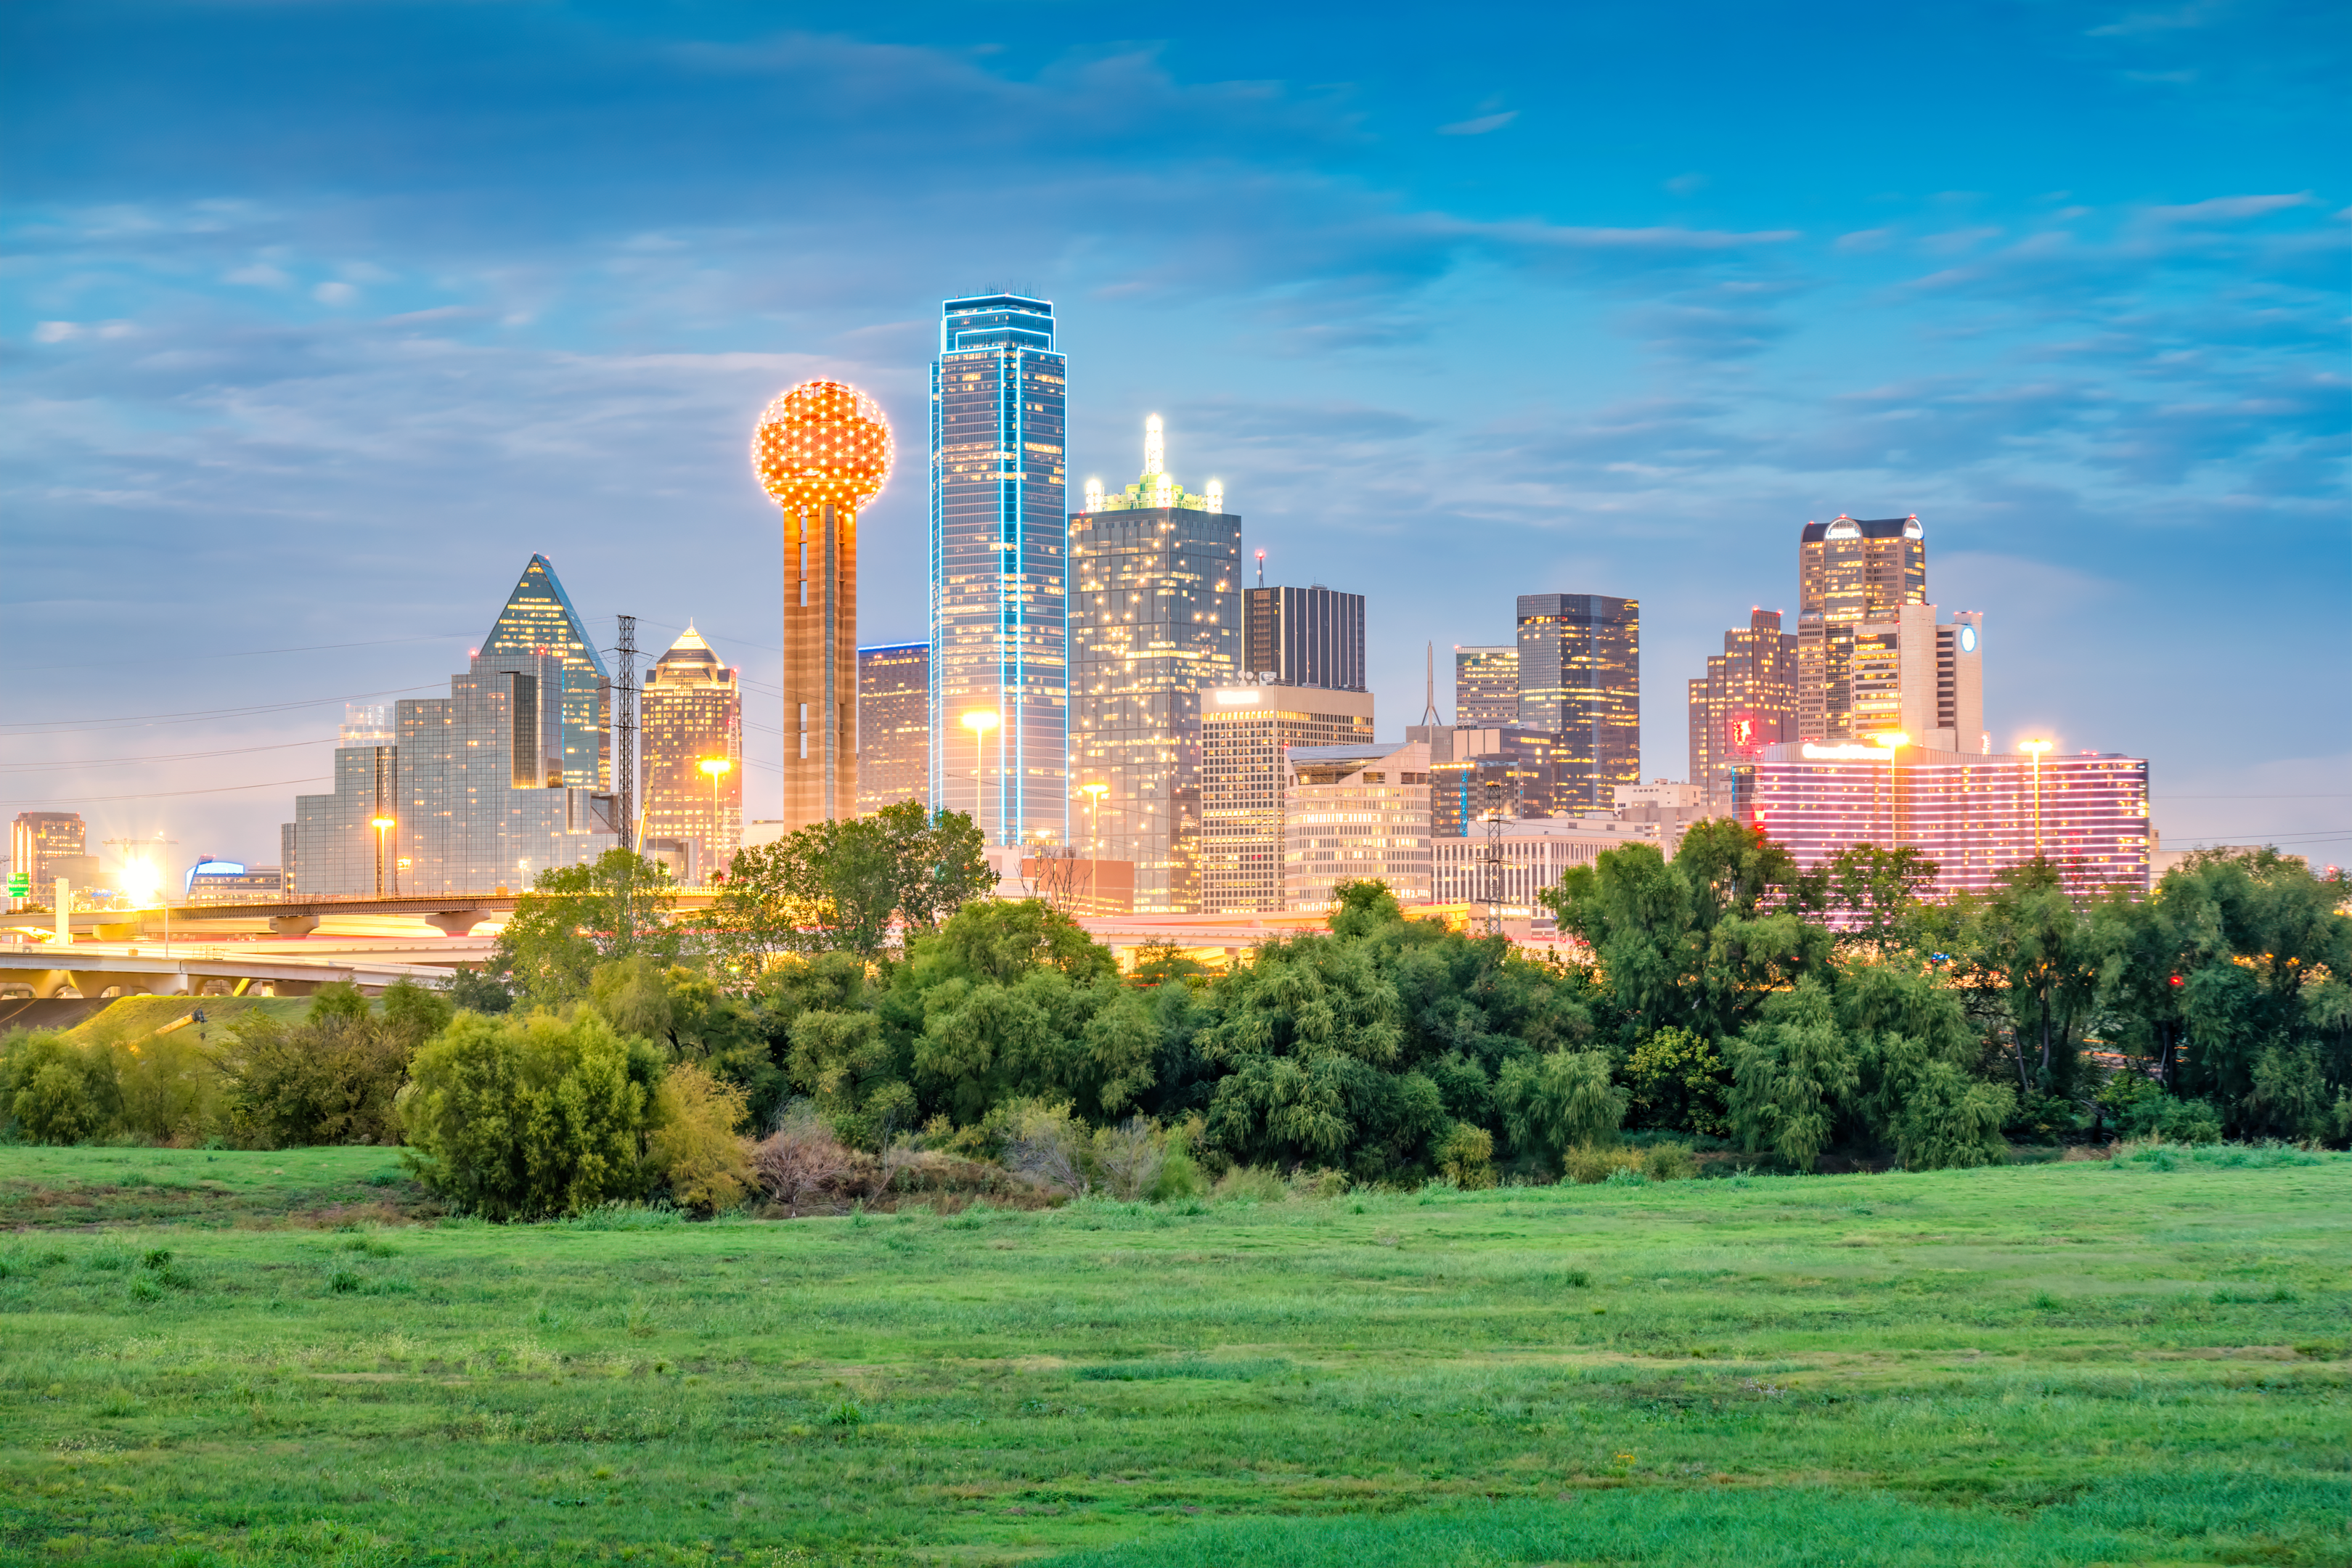 Skyline of downtown Dallas Texas USA with a green park